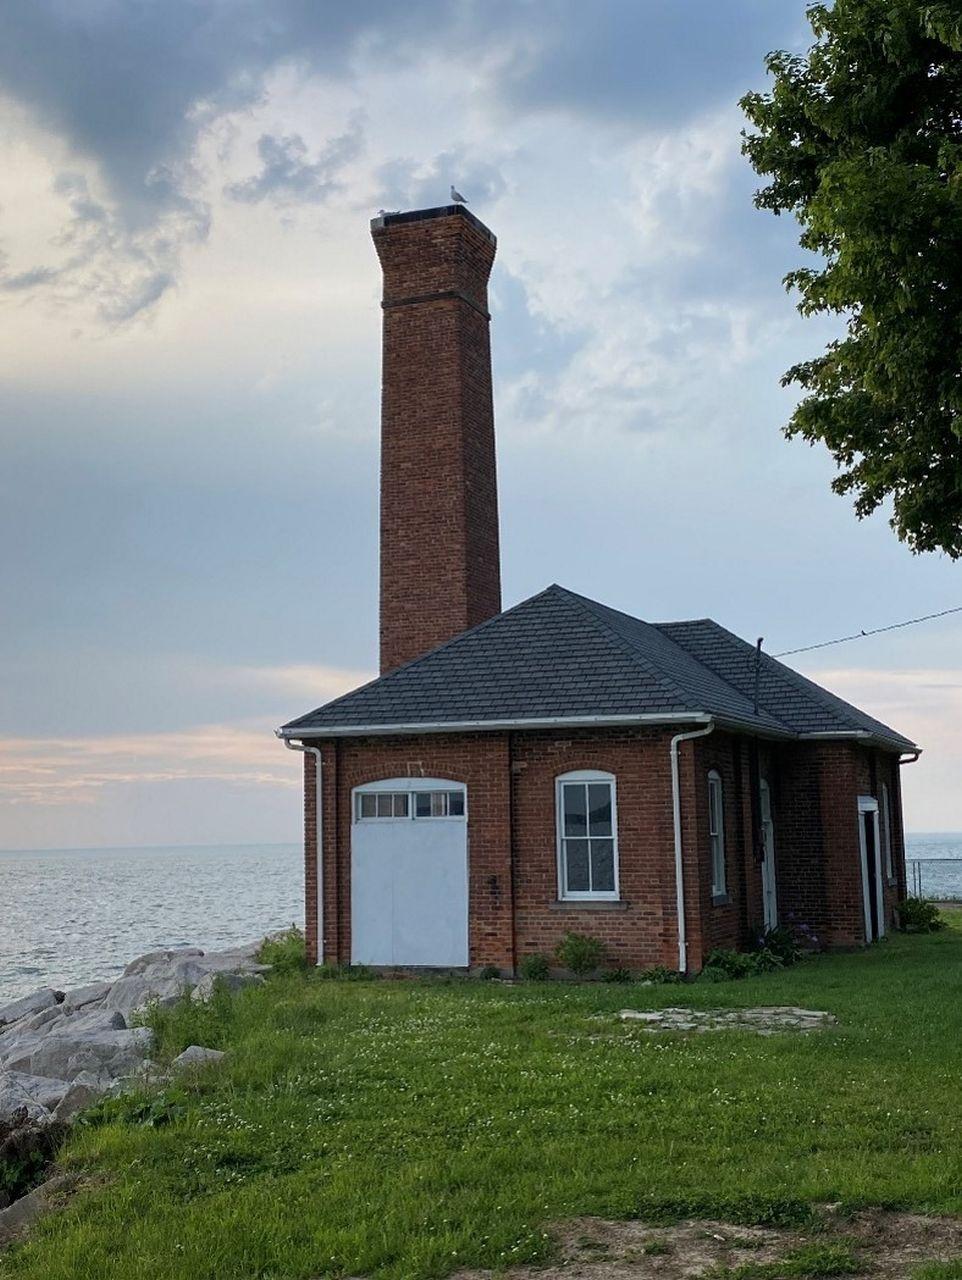 Middle Bass Club’s Pump House in 2021. Photograph by Marie Rader